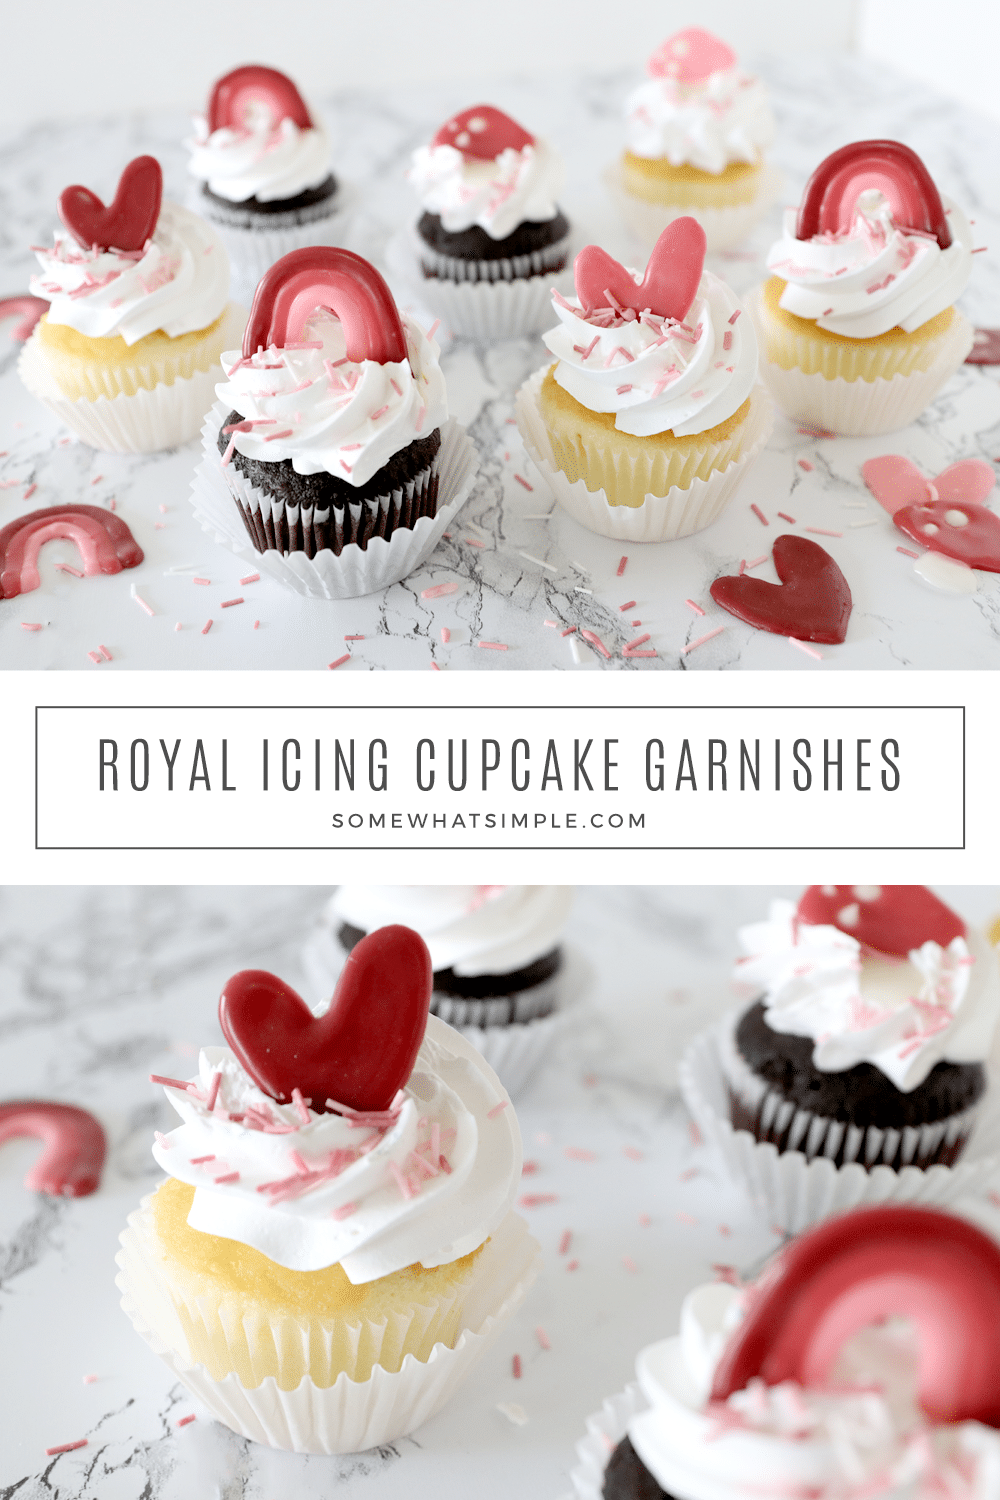 Royal Icing for Cupcakes - from Somewhat Simple